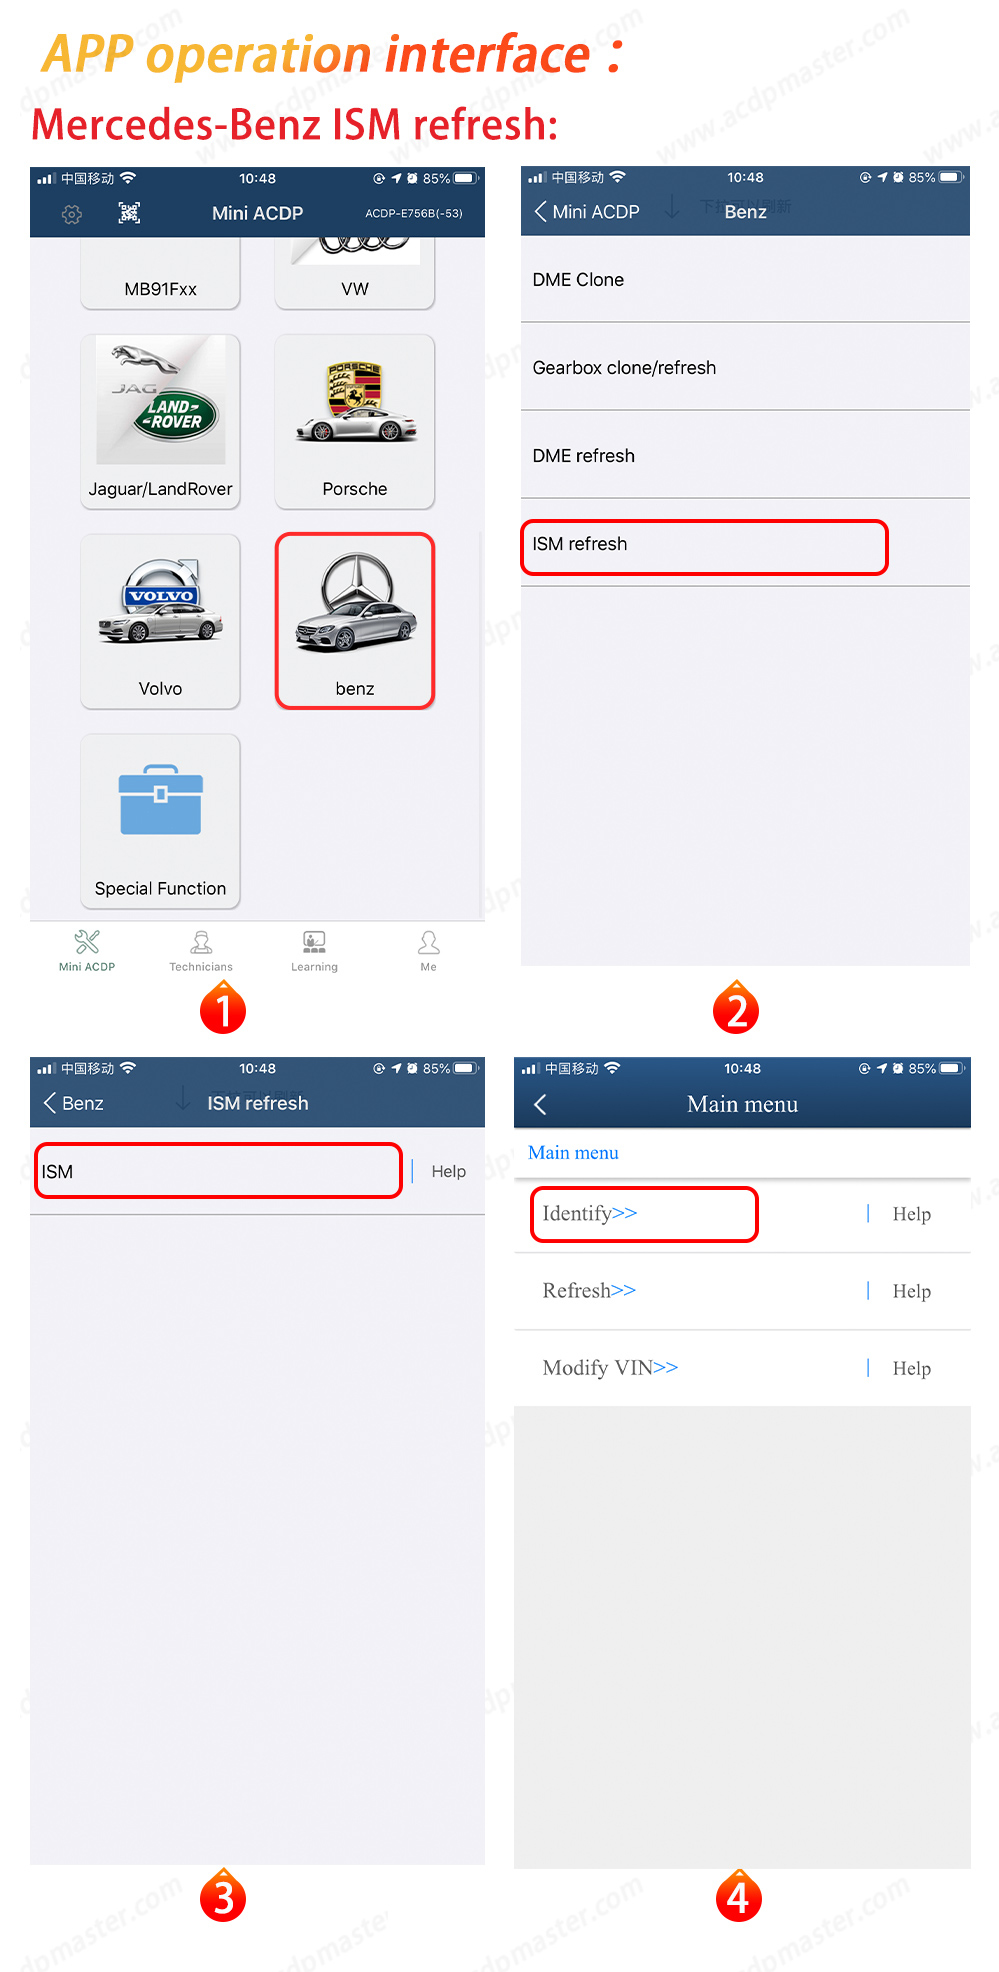 acdp2-mercedes-benz-dme-ism-refresh-module-app-operation